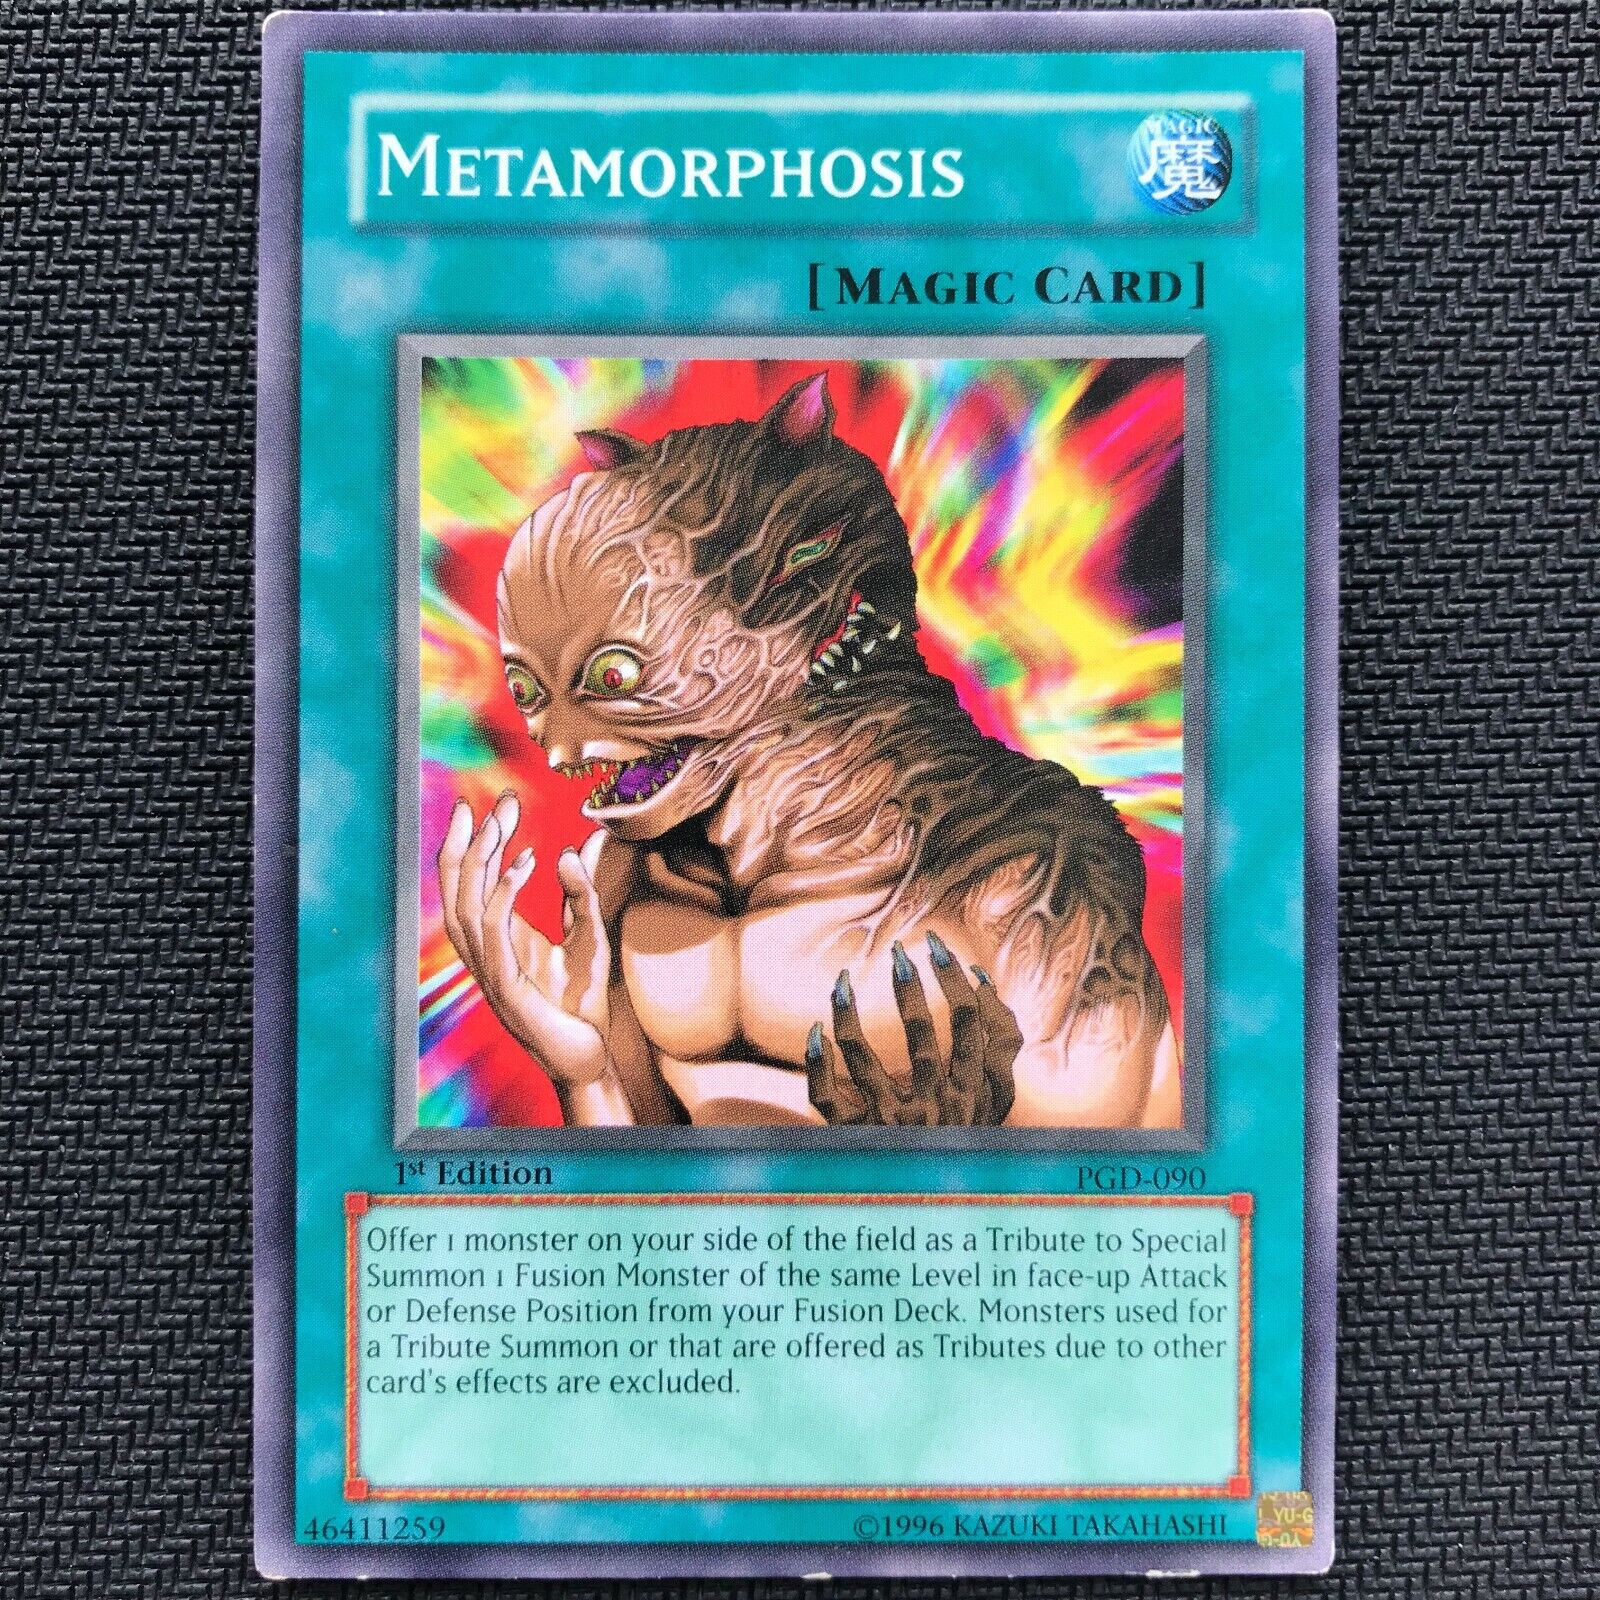 Selection of 100+ Used YuGiOh Common Deck Building Staples #1 | Goat Cards